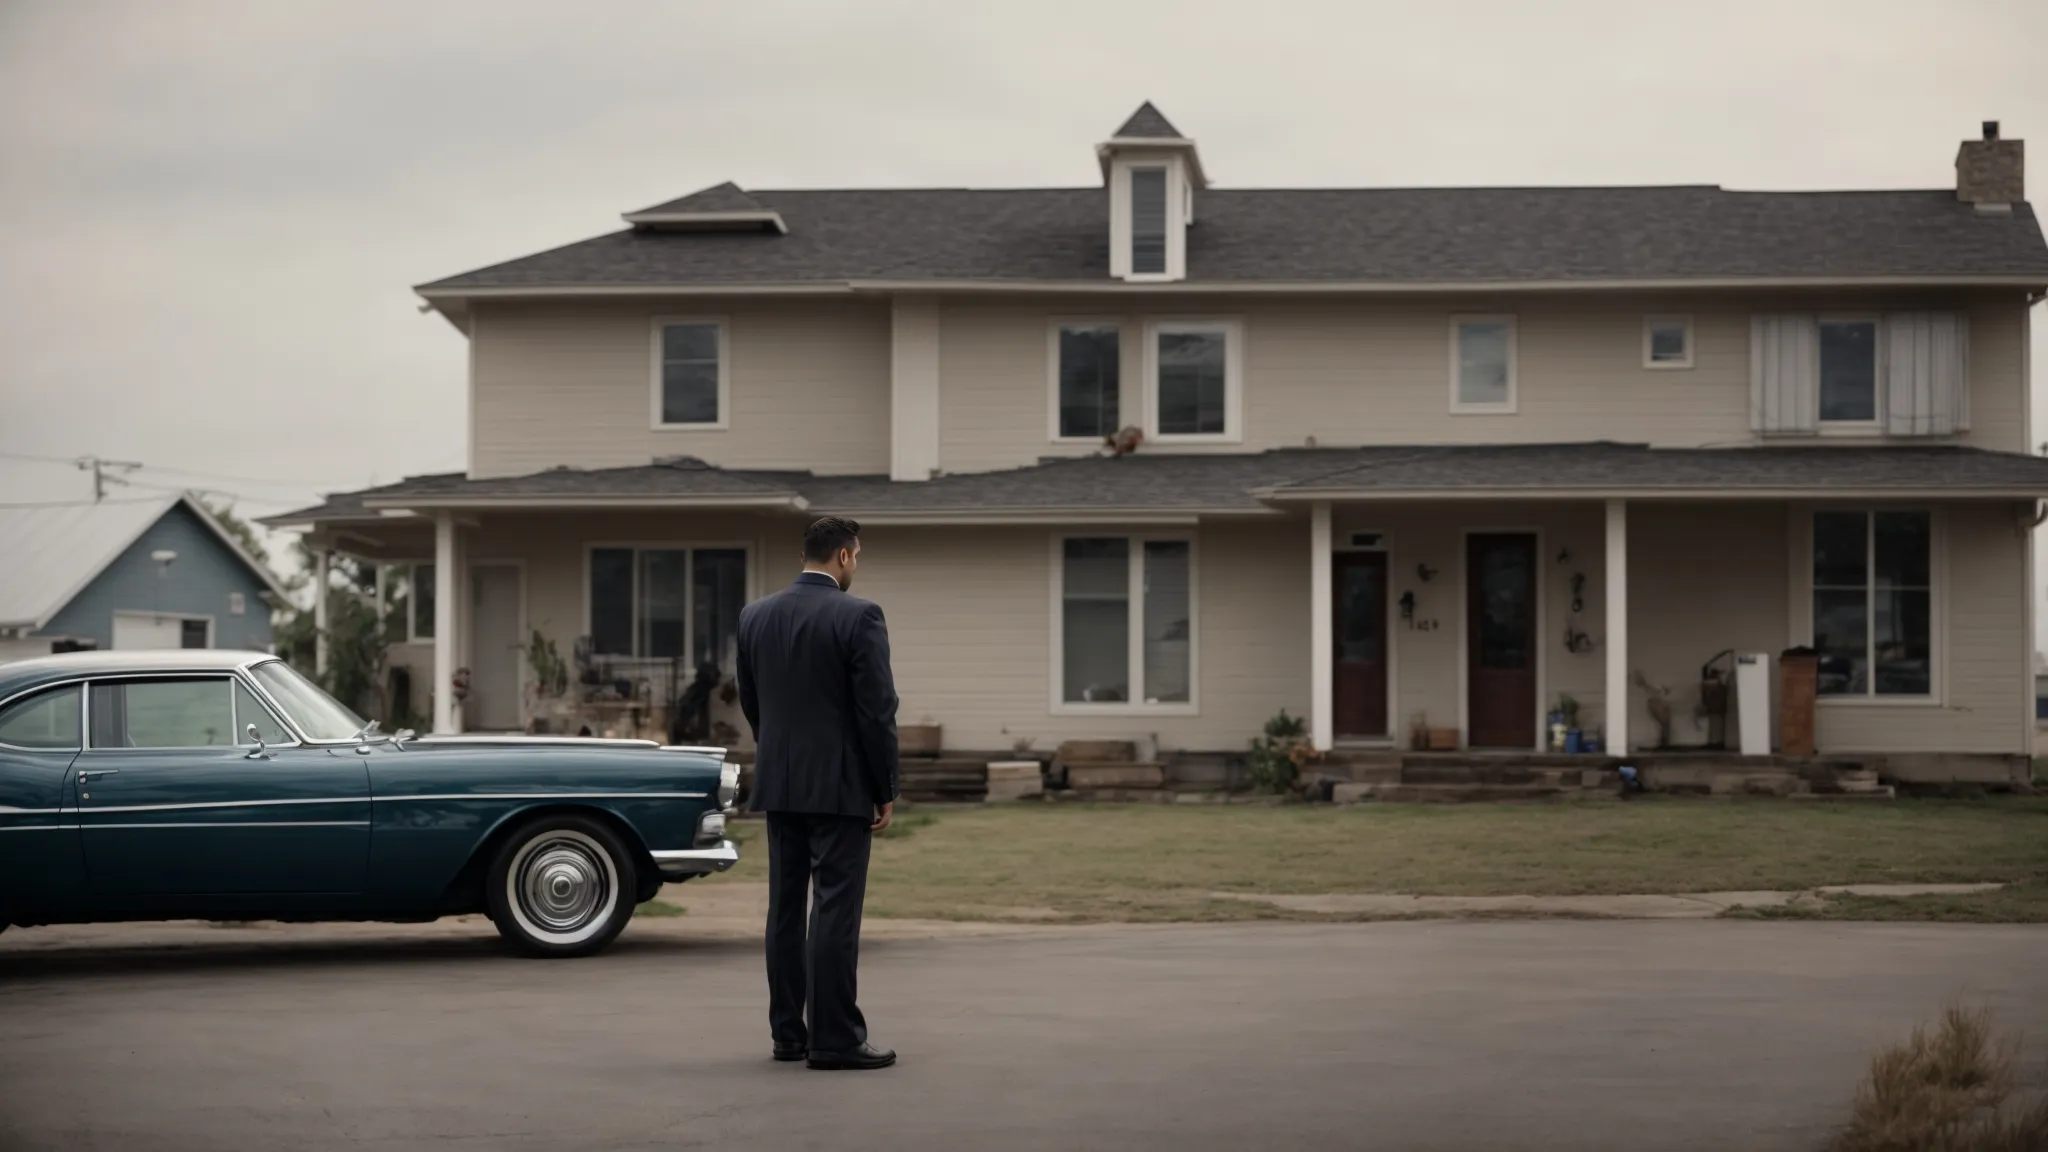 a somber individual stands beside a house, a car, and a safe, all silently awaiting valuation by a scrutinizing bail bondsman.